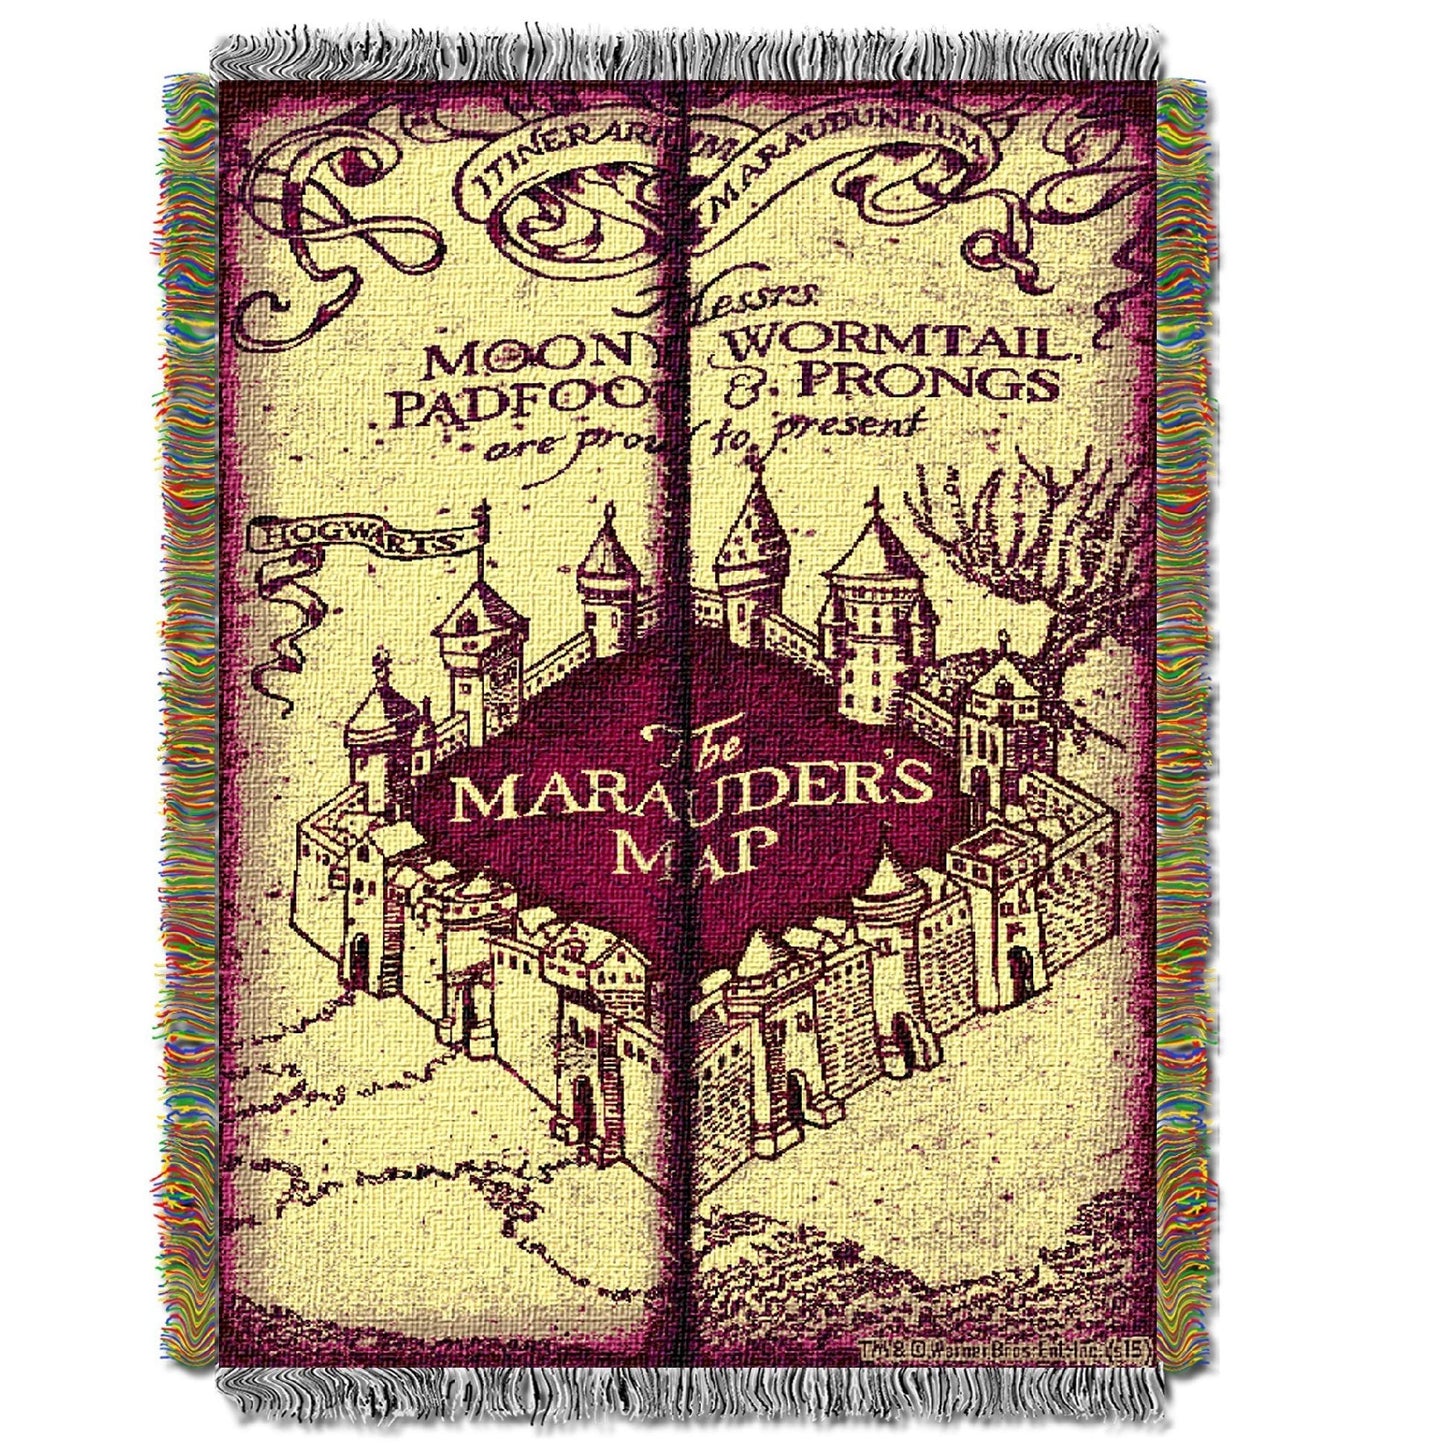 Harry Potter Marauders Map Licensed 48"x 60" Woven Tapestry Throw by The Northwest Company